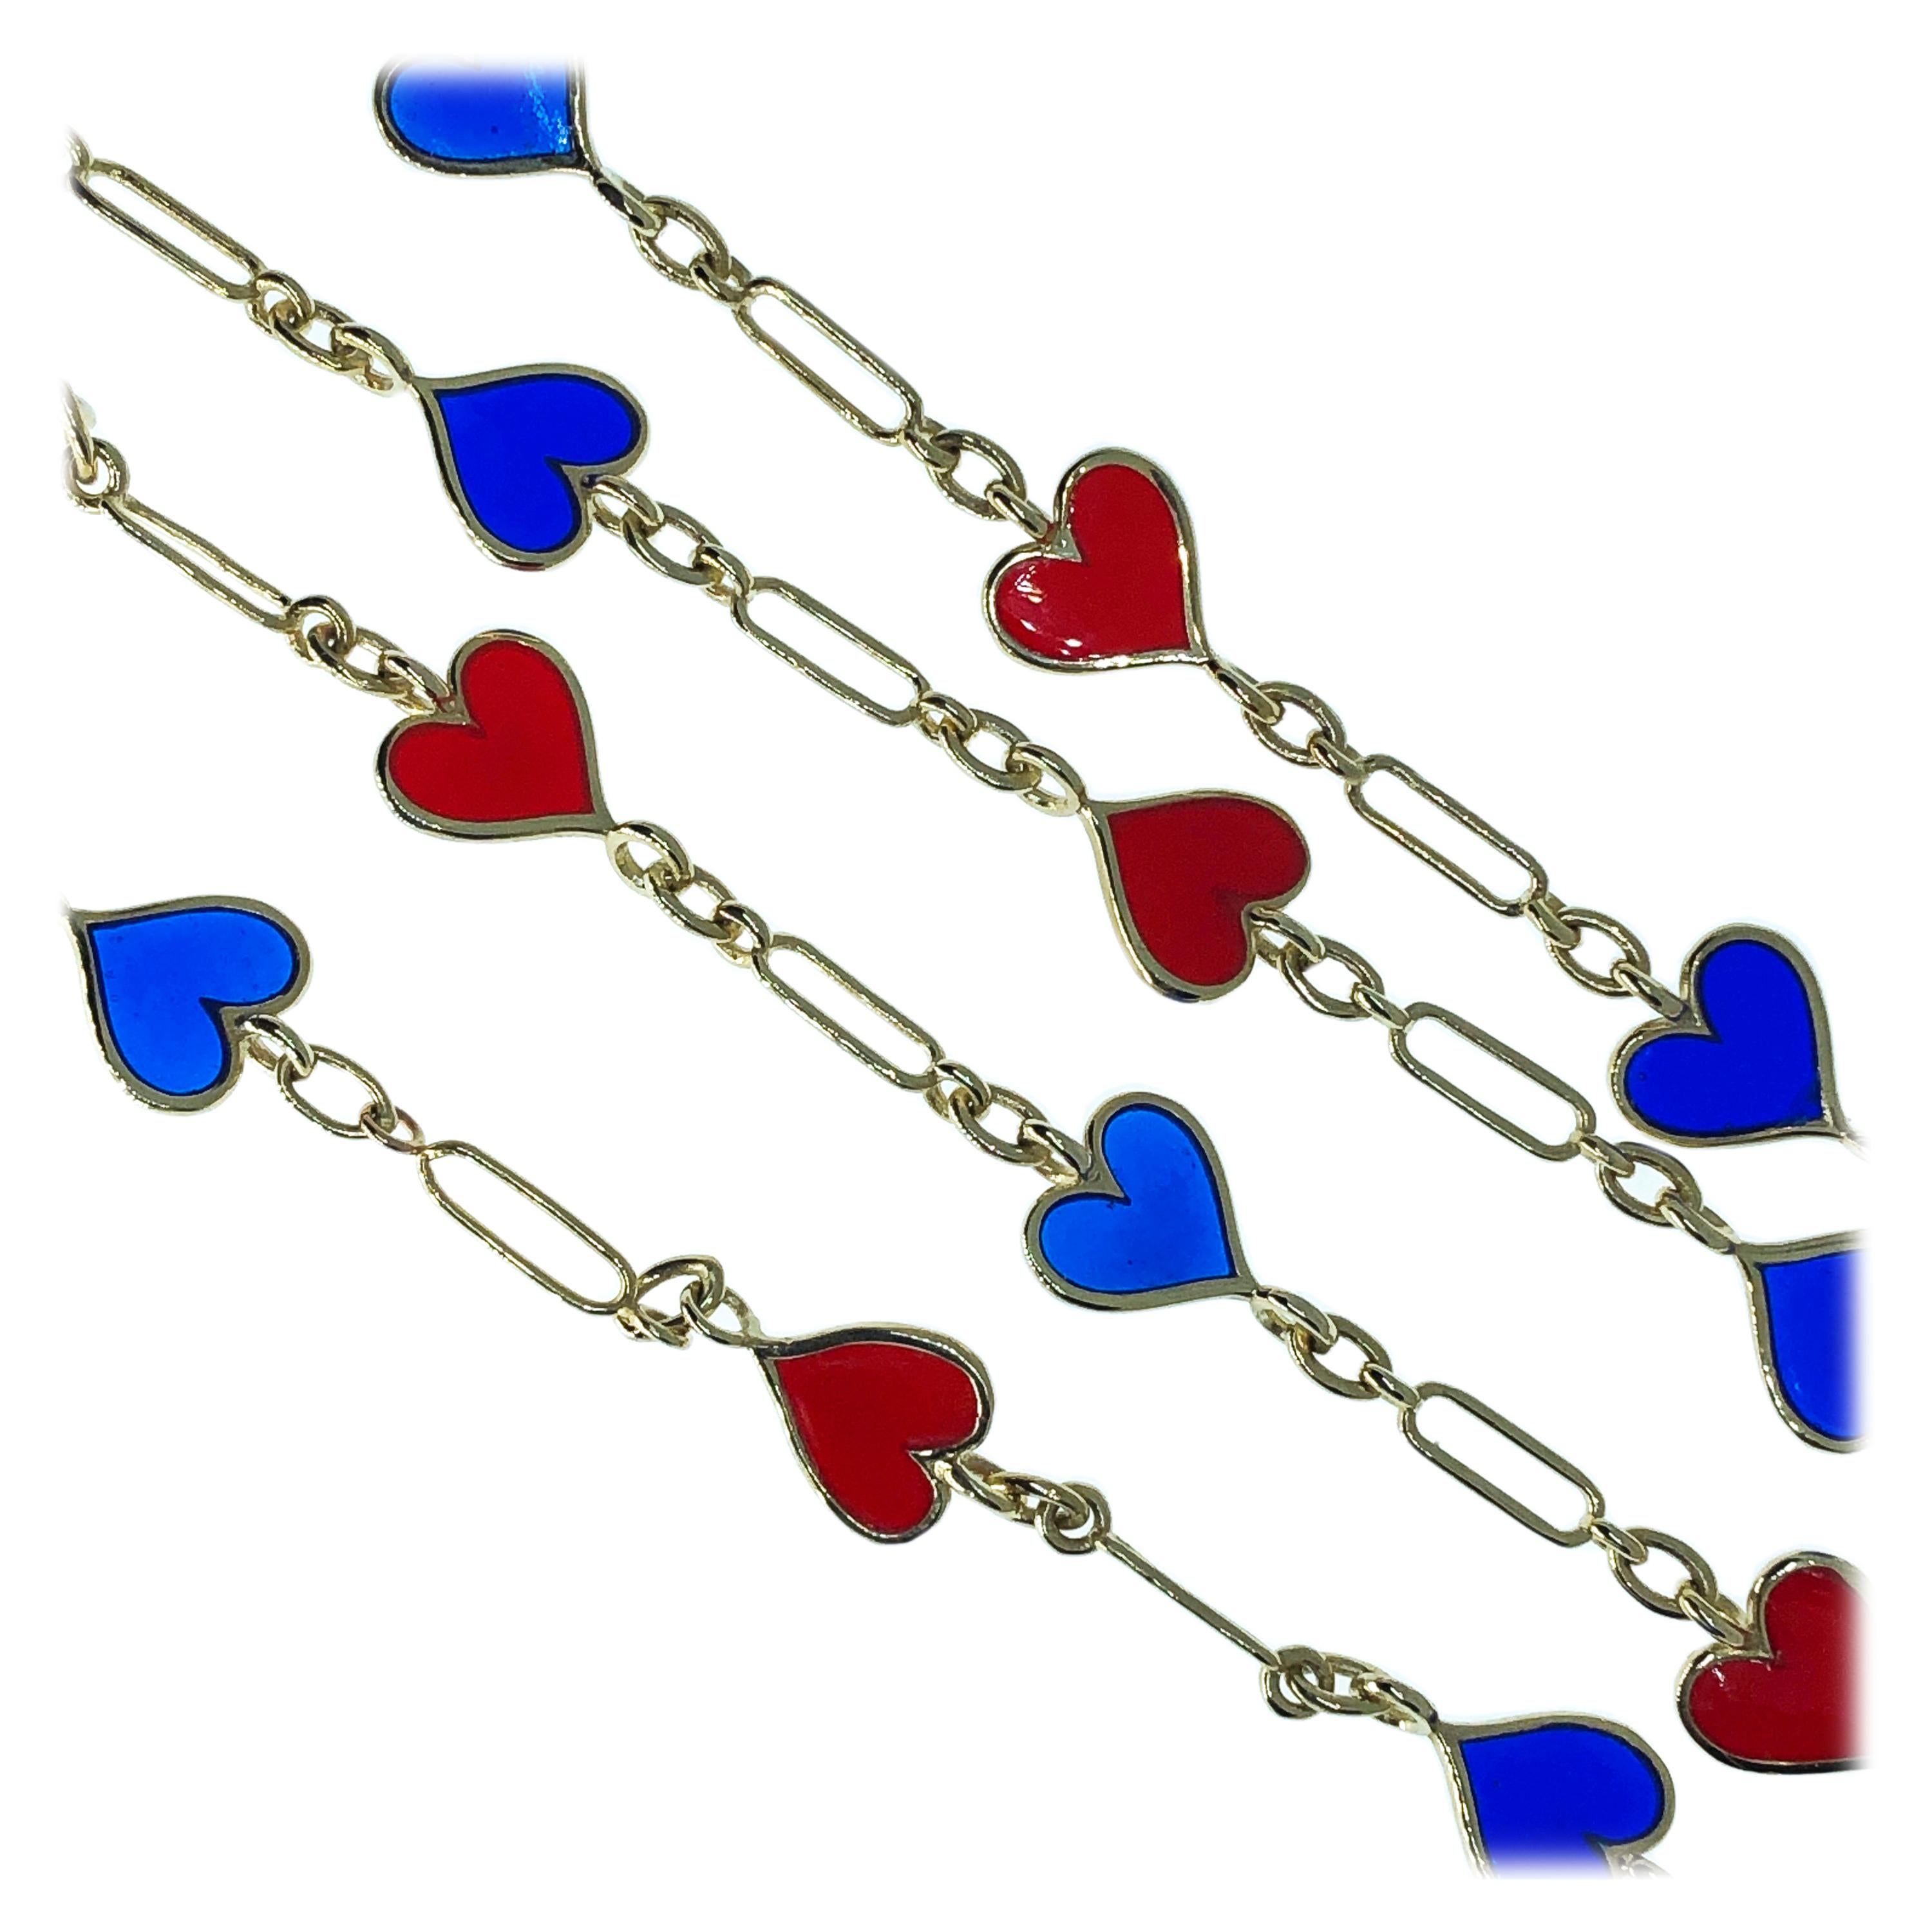 Chic yet Timeless Red and Navy Blue Plique-à-jour Hand Enamelled Heart Shaped Long Chain Necklace(31.4961 inches, 80cm), 28.9g, 0.865 Troy Ounces.
This piece is a beautiful example of italian craftsmanship and creativity: each link has been hand